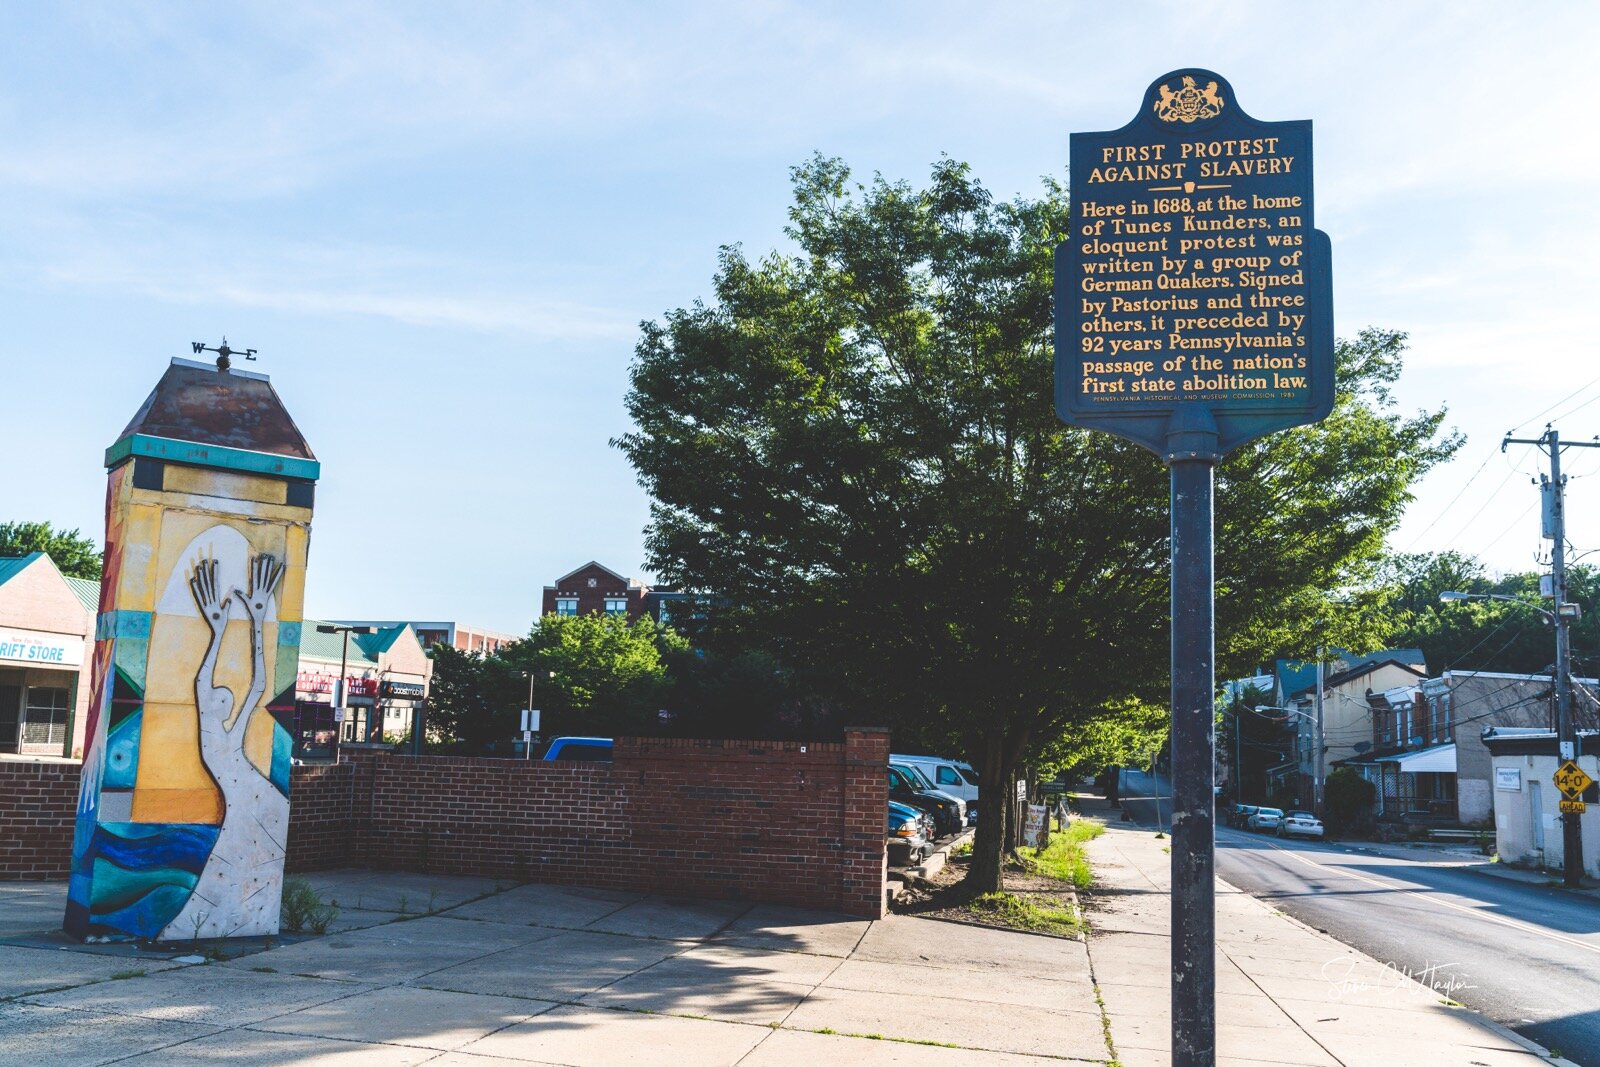 A historical marker indicating the site of the first protest against slavery in Germantown.